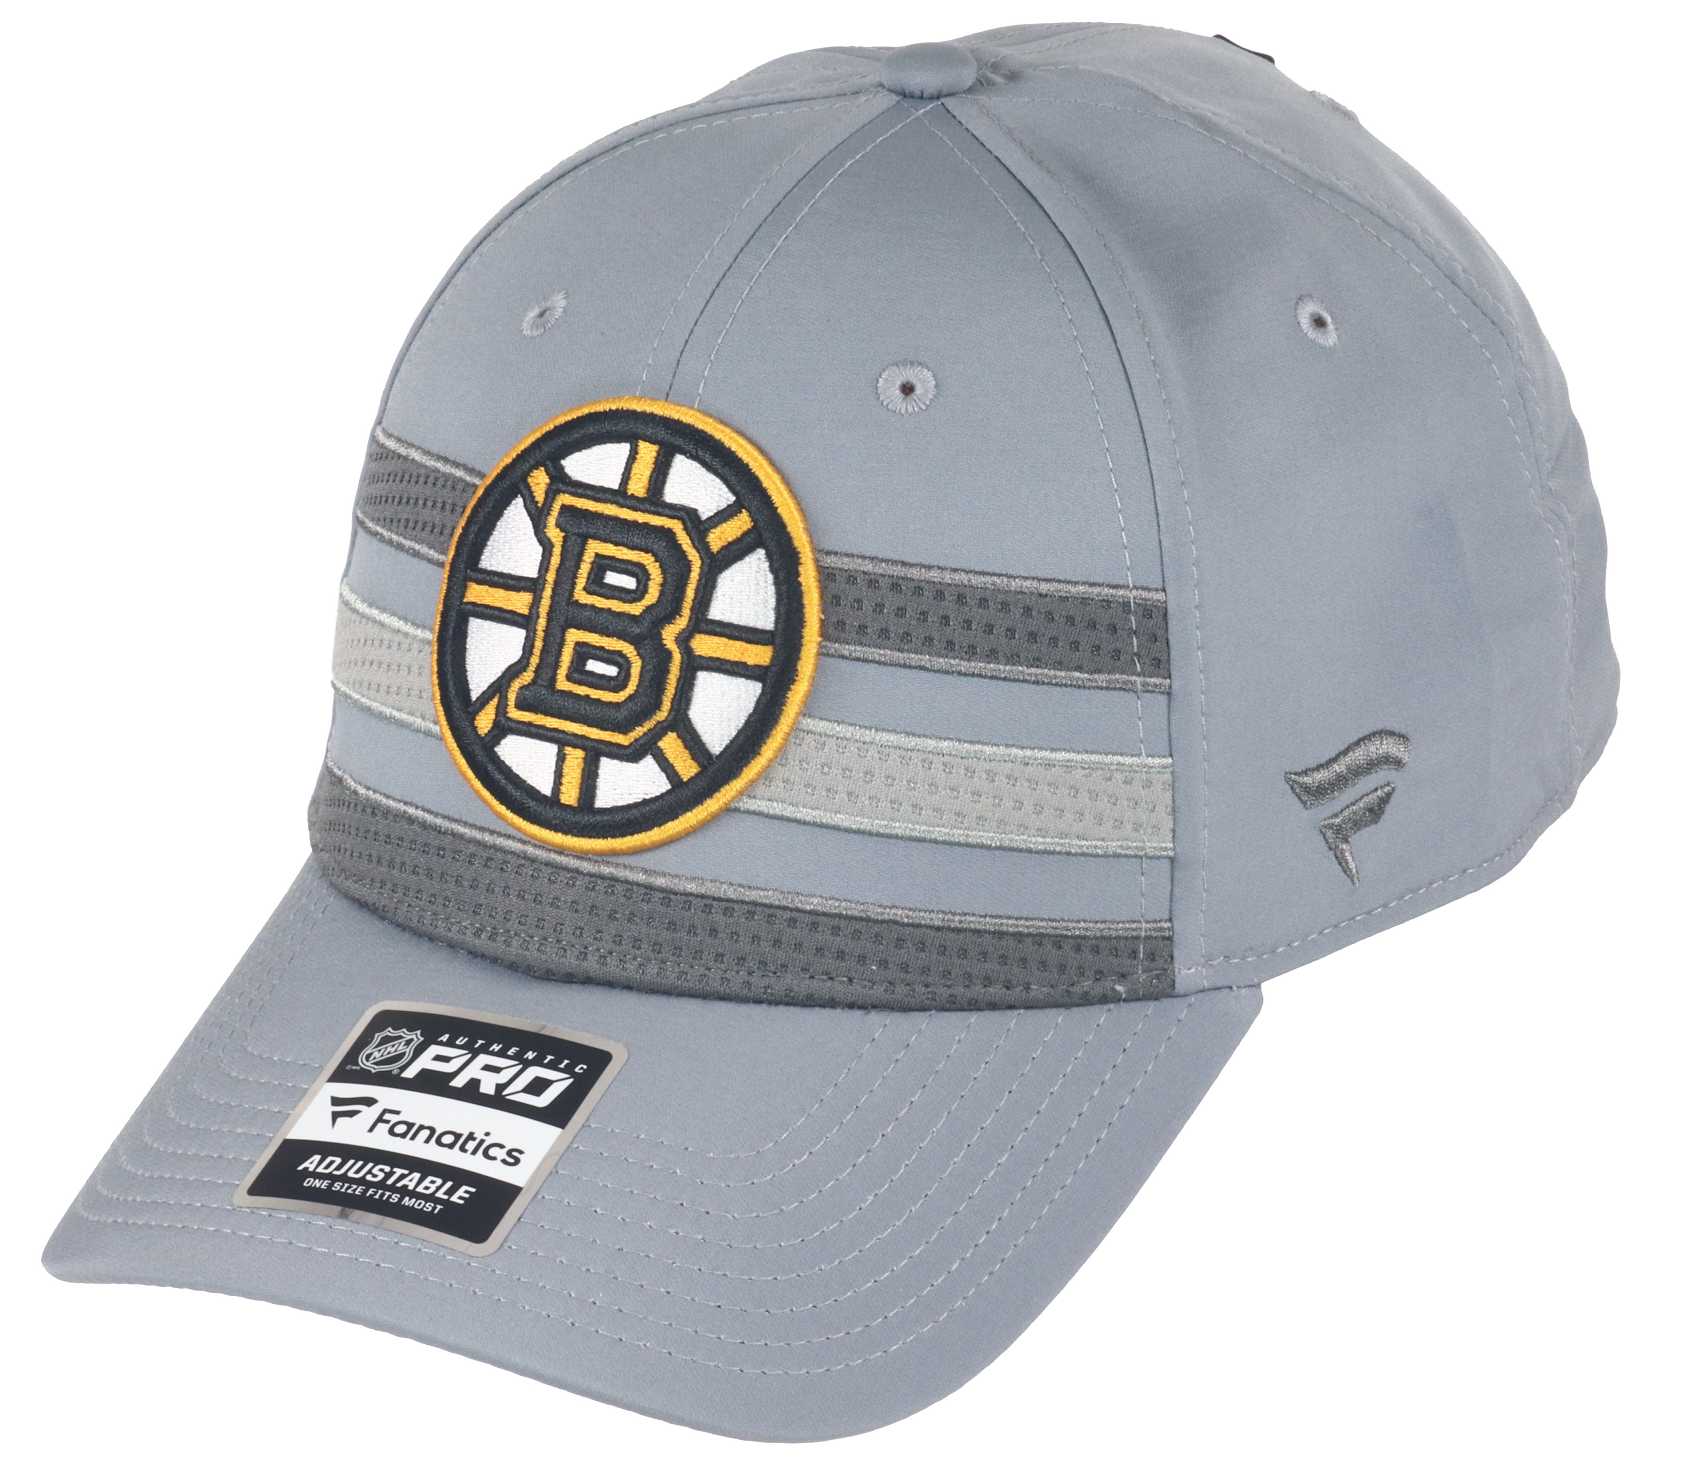 Boston Bruins NHL Authentic Pro Home Ice Structured Curved Snapback Cap Grey Fanatics